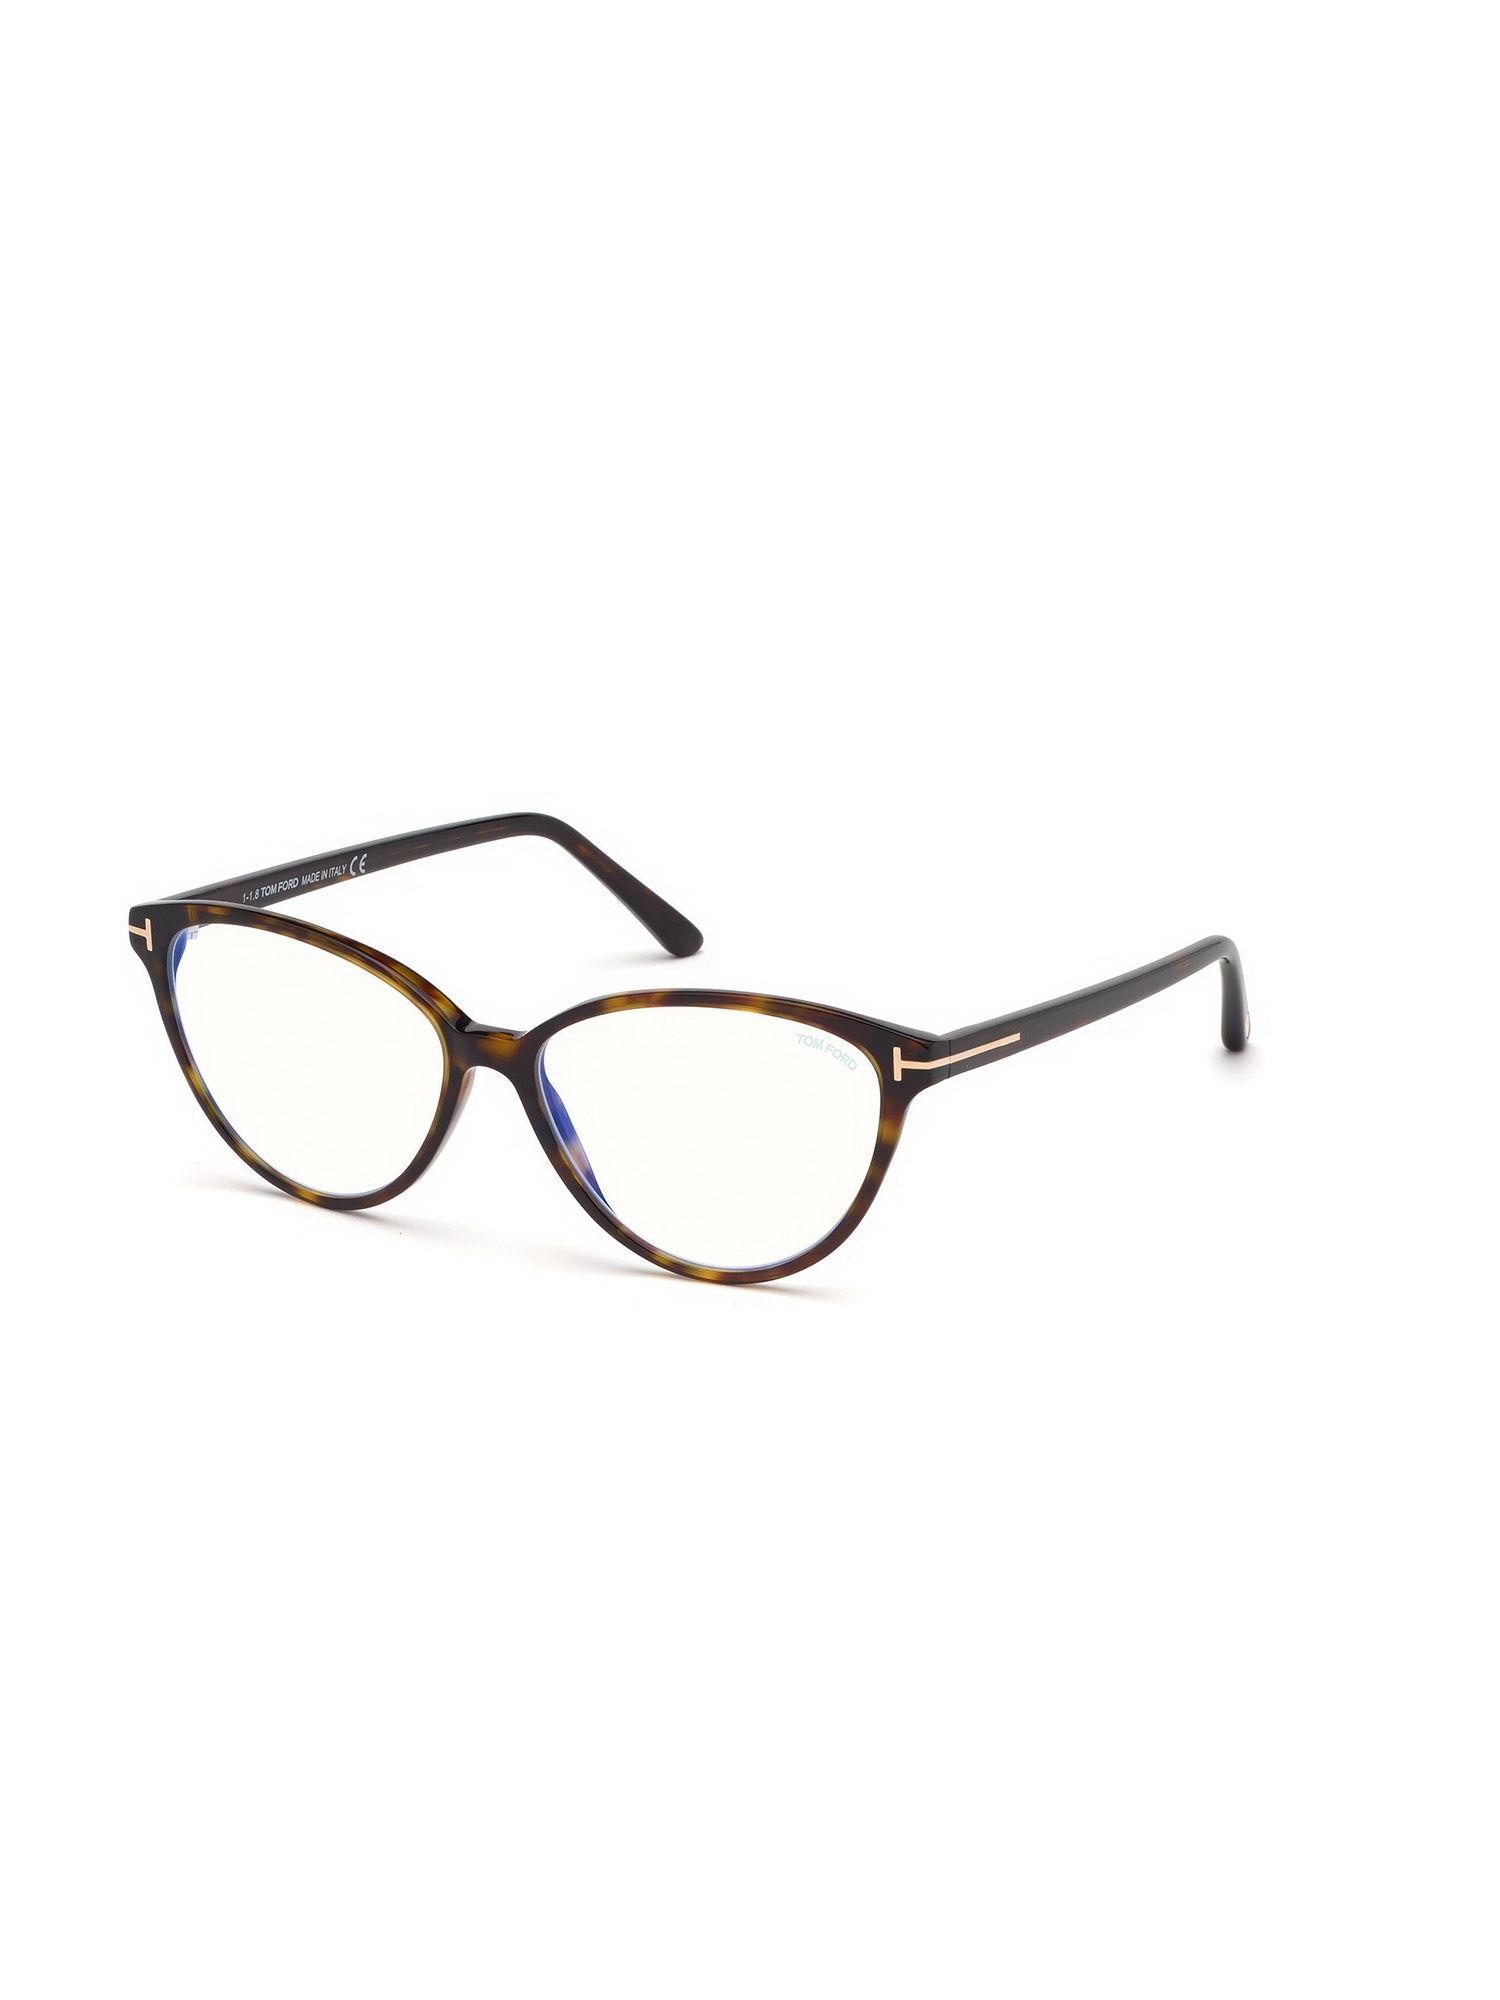 Ft5545-B 55 052 IS A Selection Of Iconic Cat Eye Shapes IN Premium Men Sunglasses